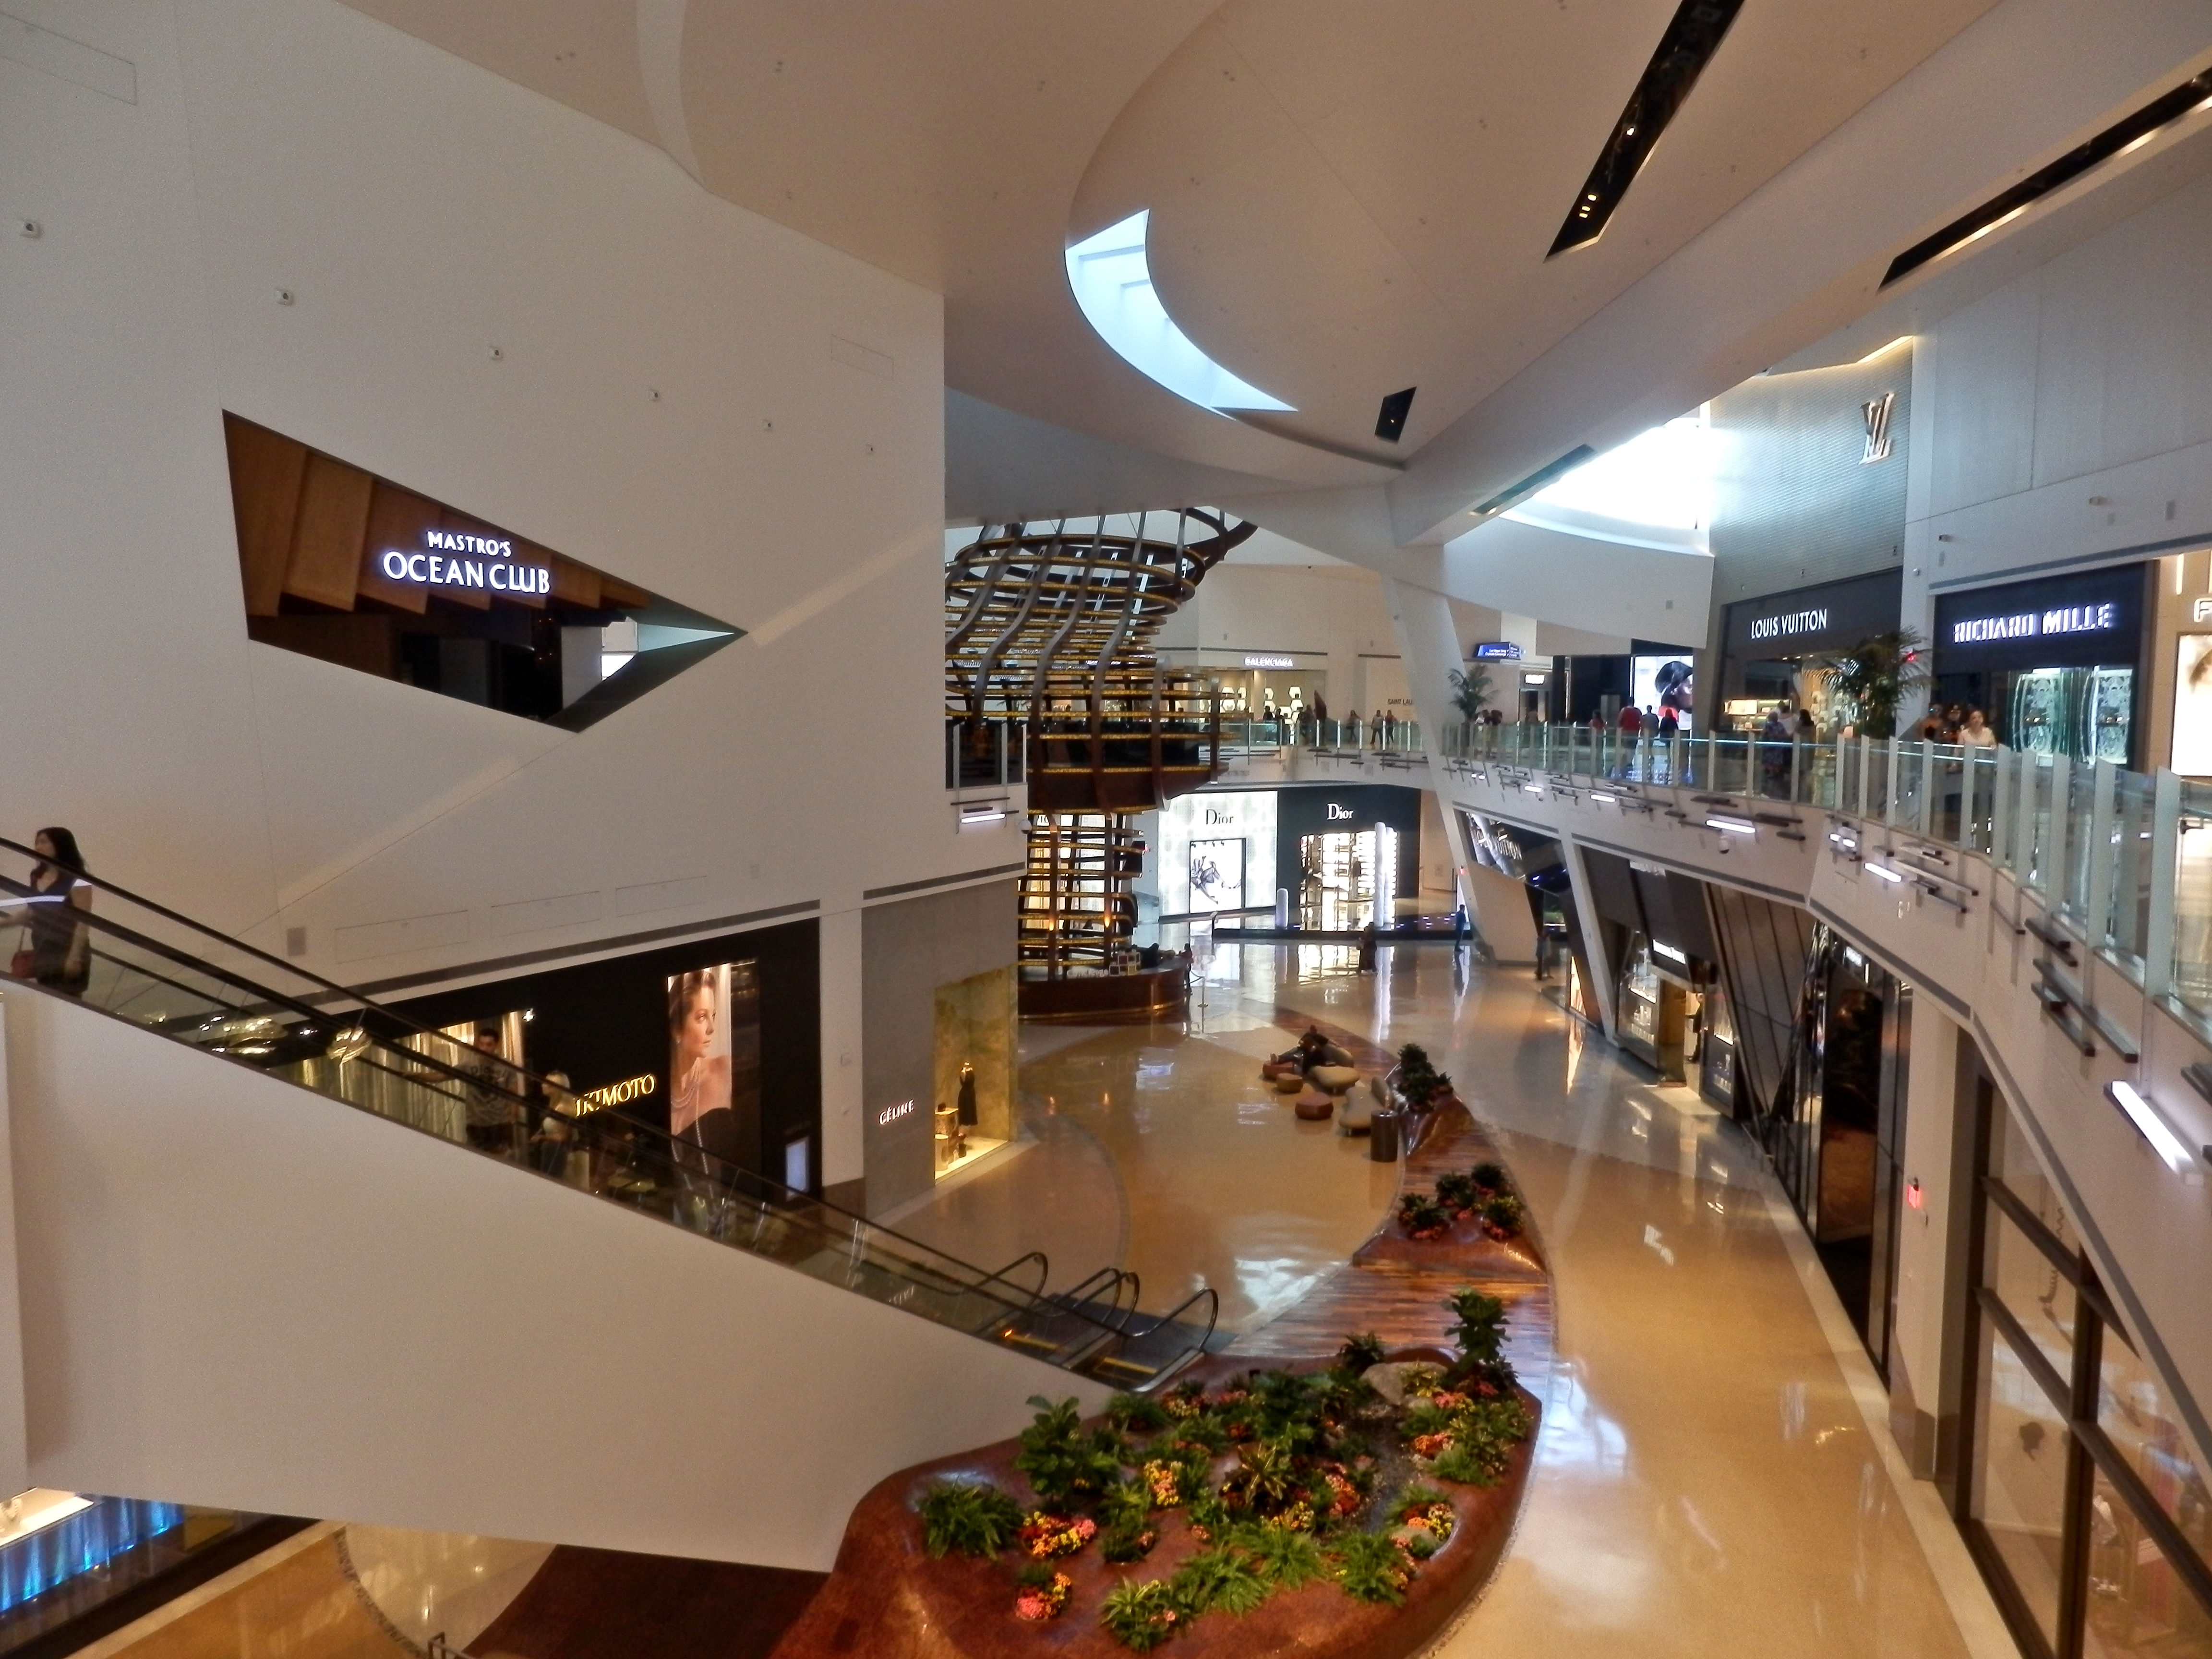 The Shops at Crystals (@crystalslv) • Instagram photos and videos